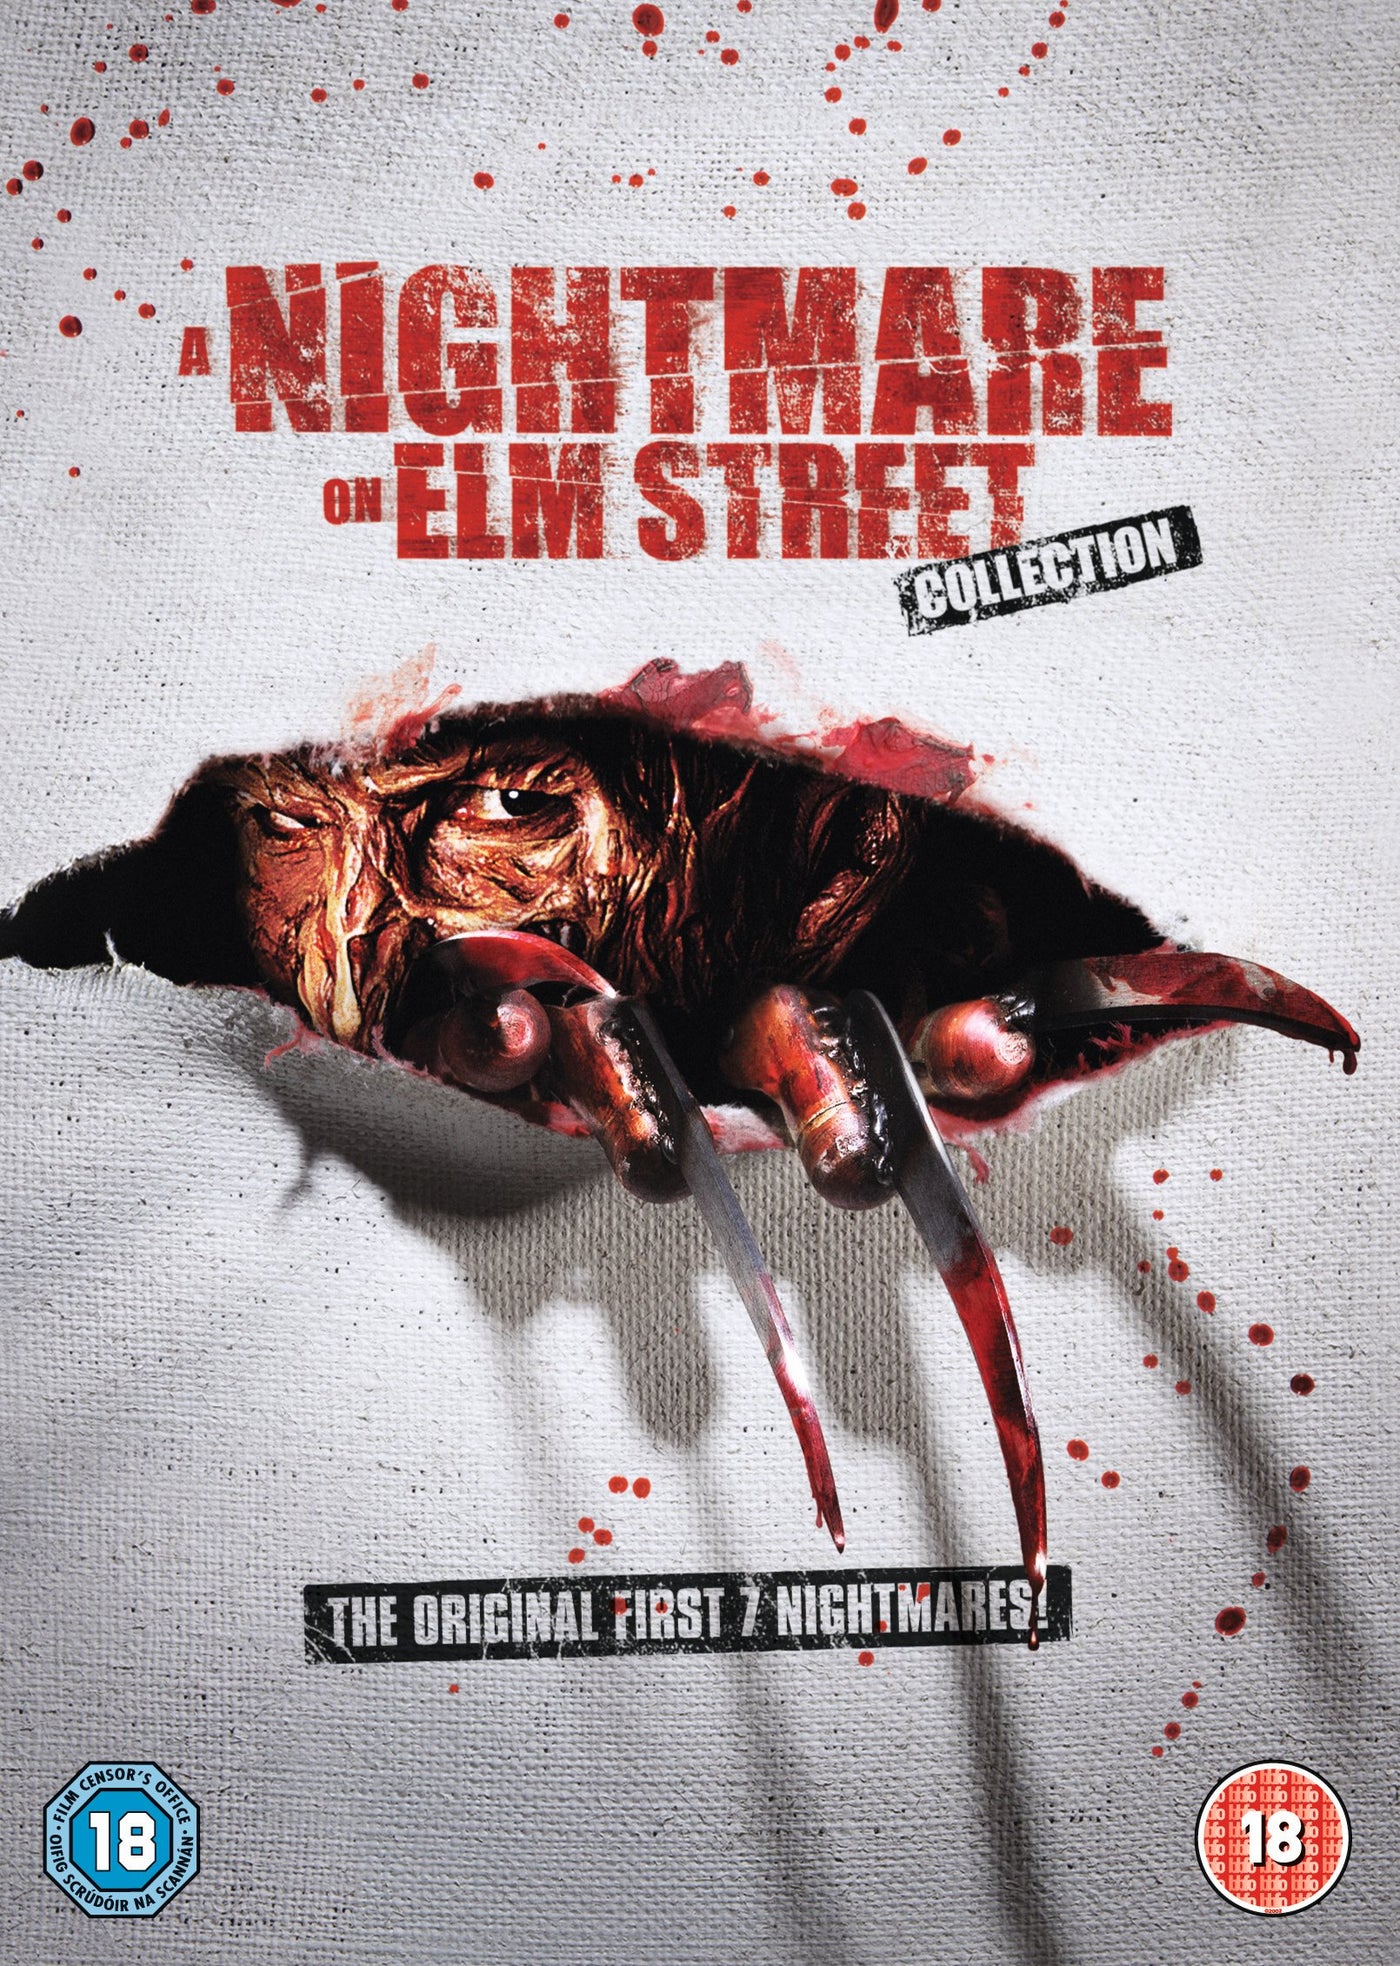 A Nightmare On Elm Street Collection [2011] (DVD)